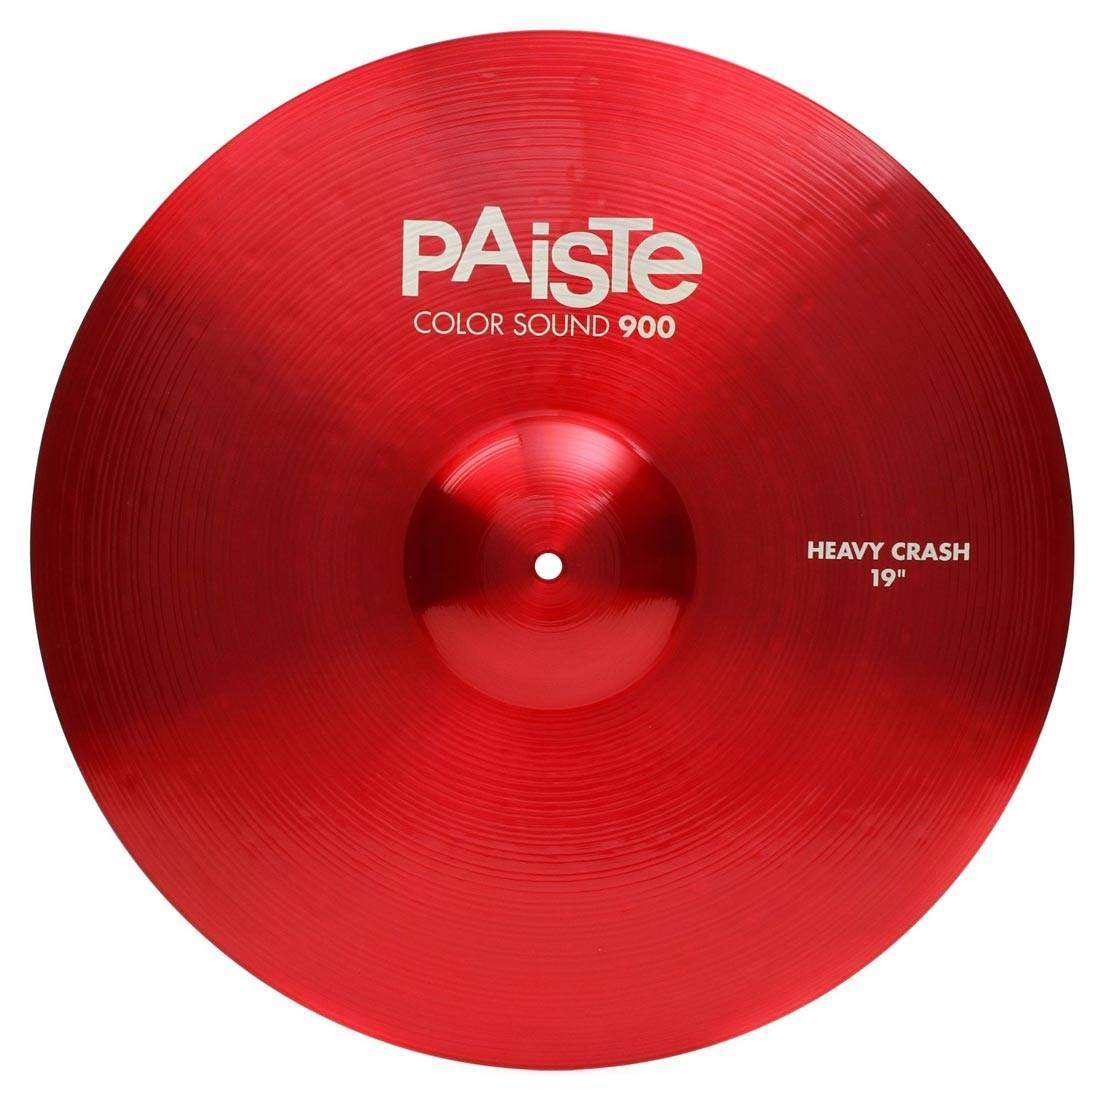 PAISTE 900 Color Sound 19'' Red Heavy Crash Cymbal